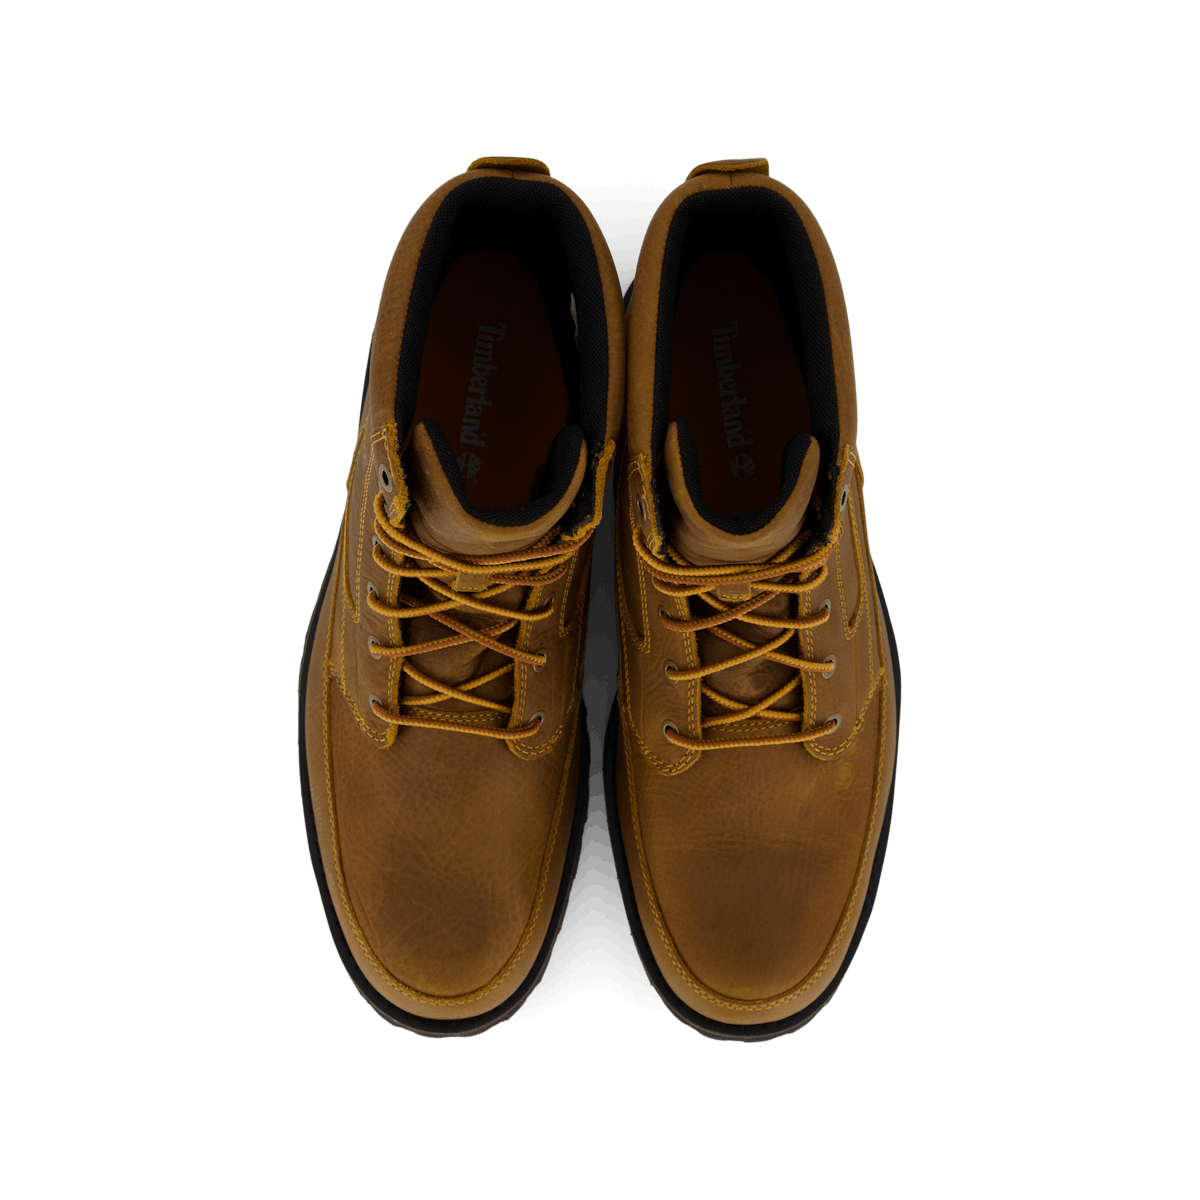 Attleboro Mid Lace Up Boot Whe Wheat